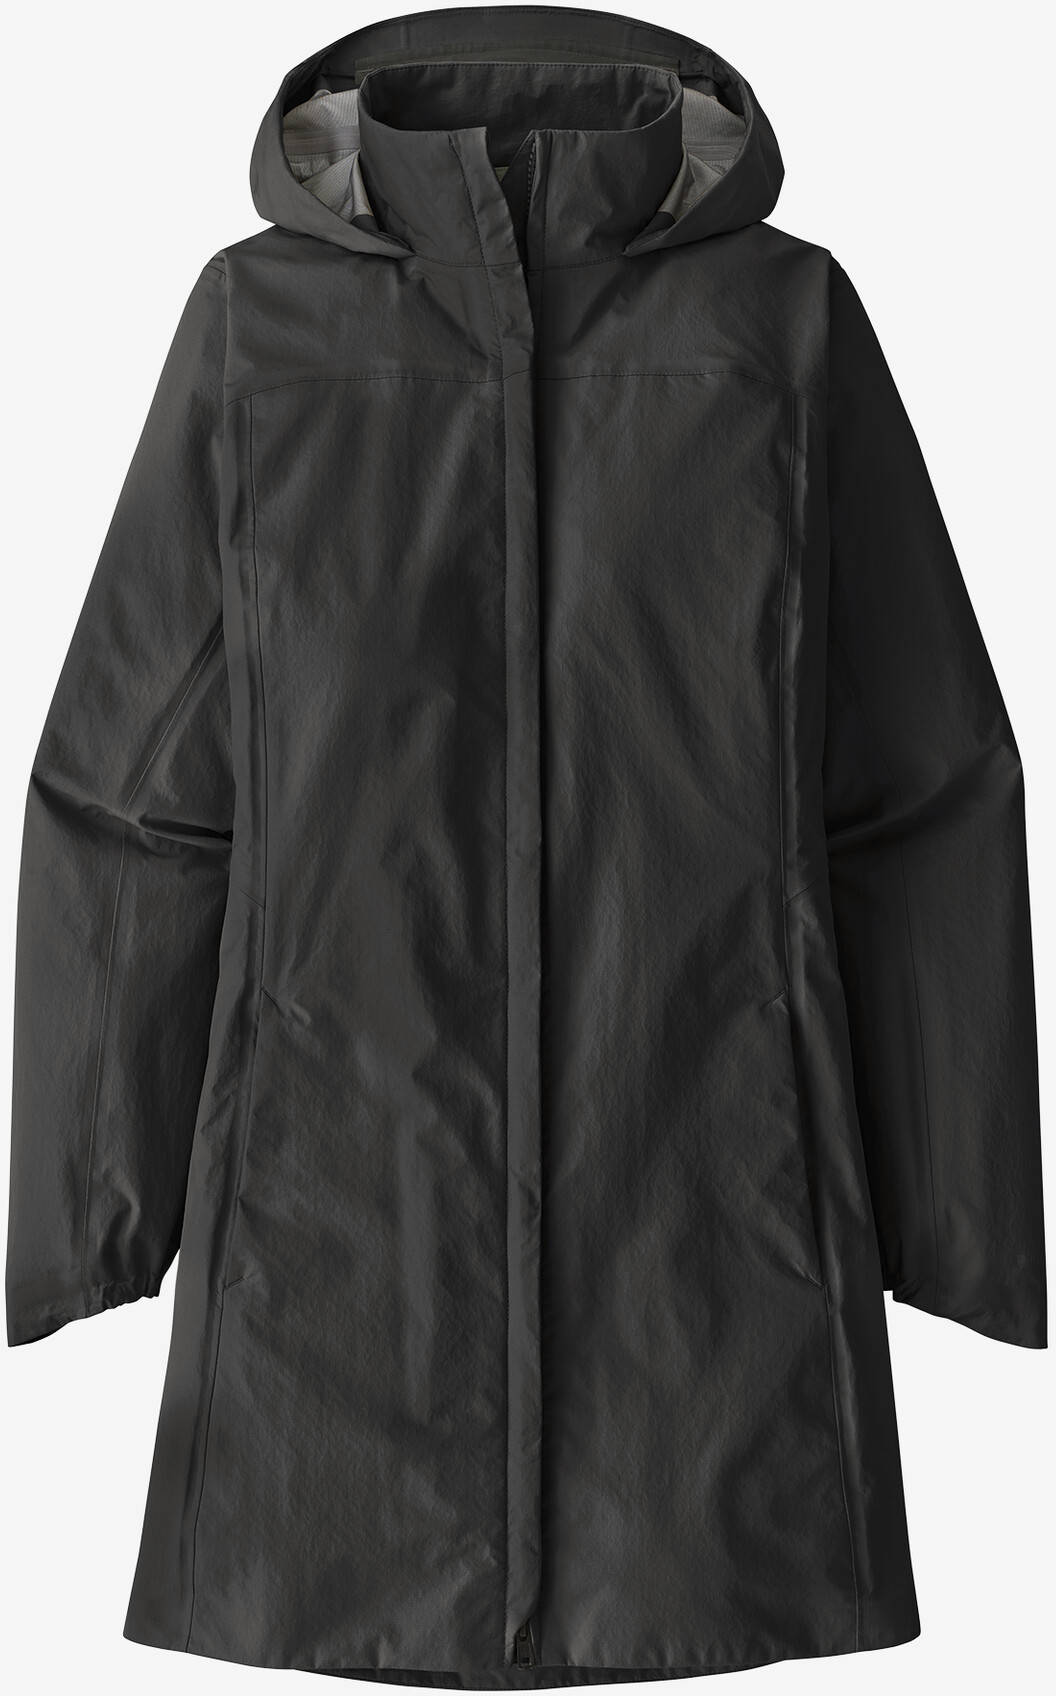 Unlock Wilderness' choice in the Helly Hansen Vs Patagonia comparison, the Torrentshell 3L City Coat by Patagonia